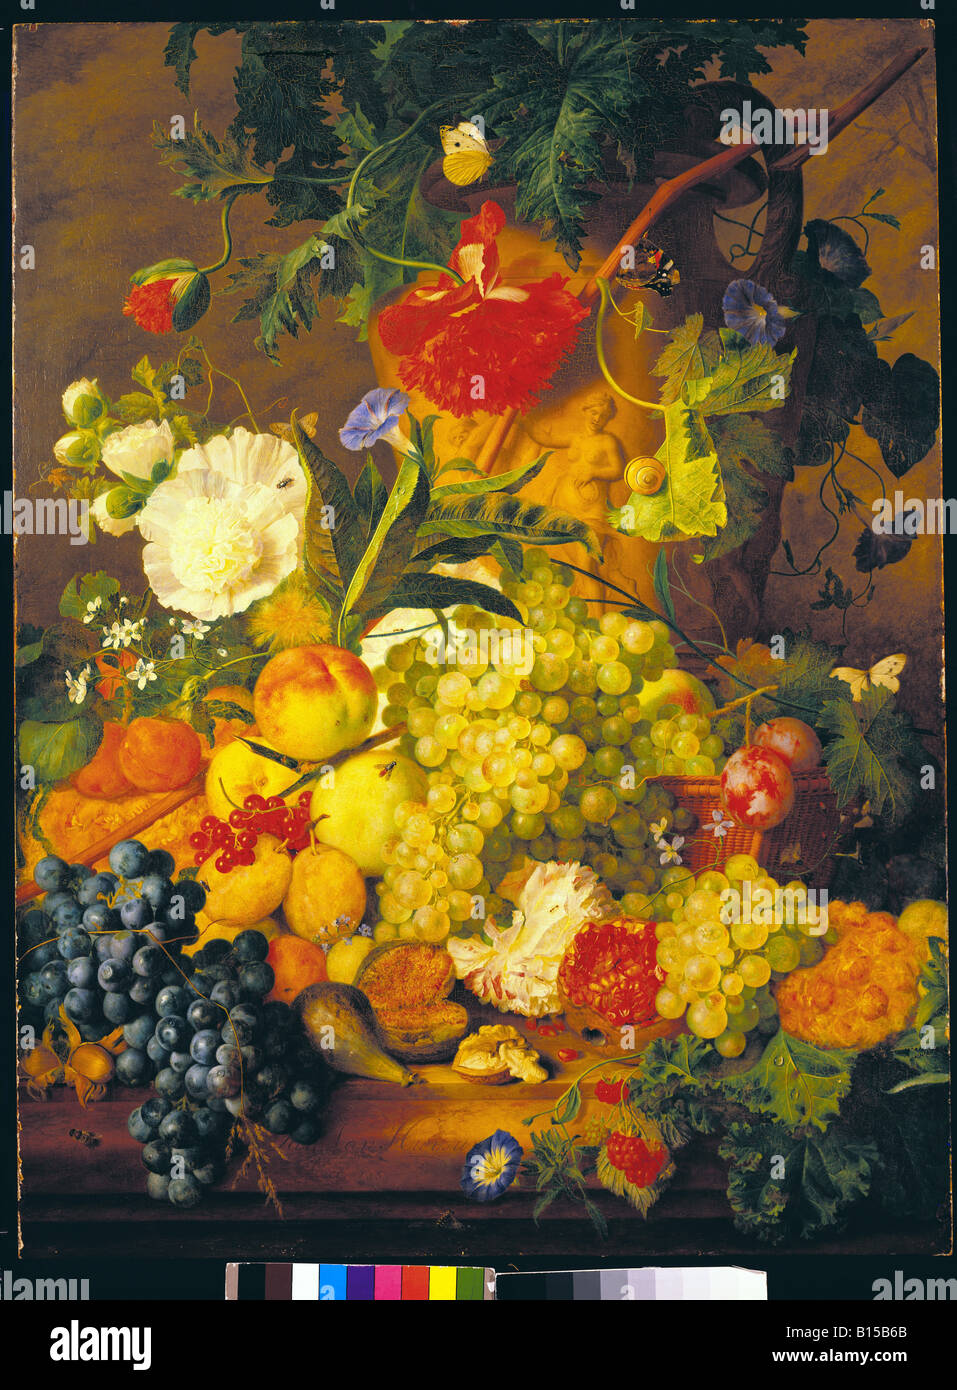 fine arts, Huysum Jan van (1682 - 1749), painting, 'Fruits, Flowers and Insects', 1735, Schleissheim Castle, , Artist's Copyright has not to be cleared Stock Photo